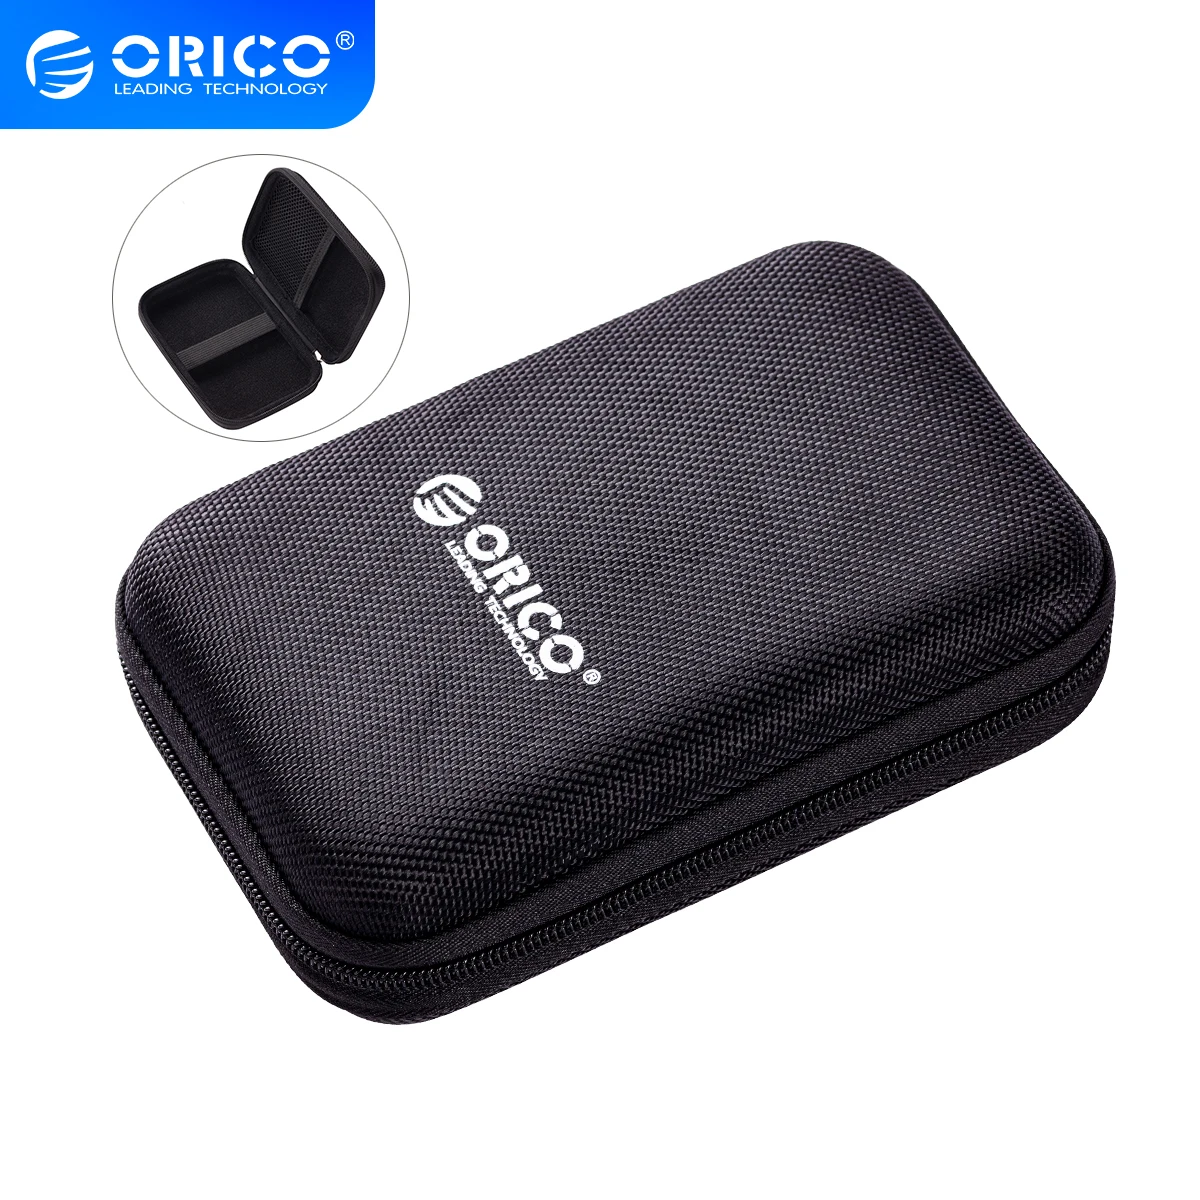 

ORICO 2.5 Inch HDD Box Bag Case Portable Hard Drive Bag for External Portable HDD hdd box case storage Protection Black/Red/Blue